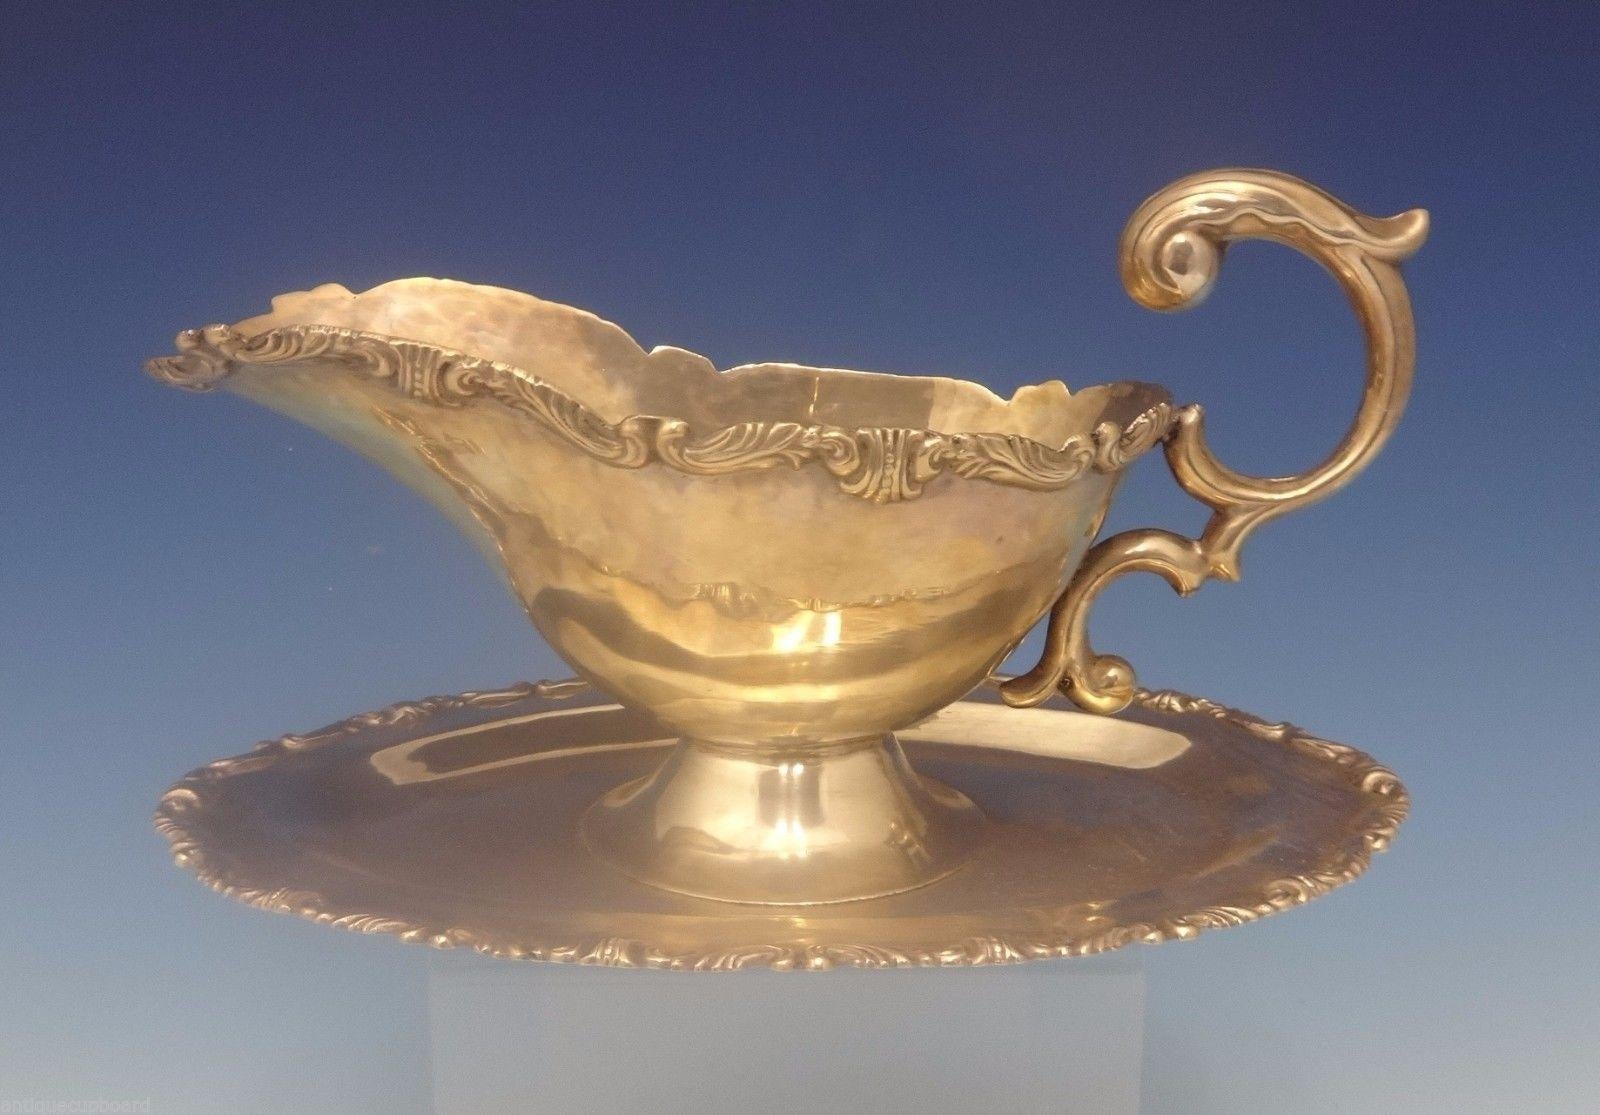 Camusso of Peru sterling silver gravy boat with an attached underplate and thick scrolly border. Heavy handwrought piece. It measures 5 tall by 10 long and weighs 16.1 ozt. It dates from the 1940s. It is not monogrammed and is in excellent